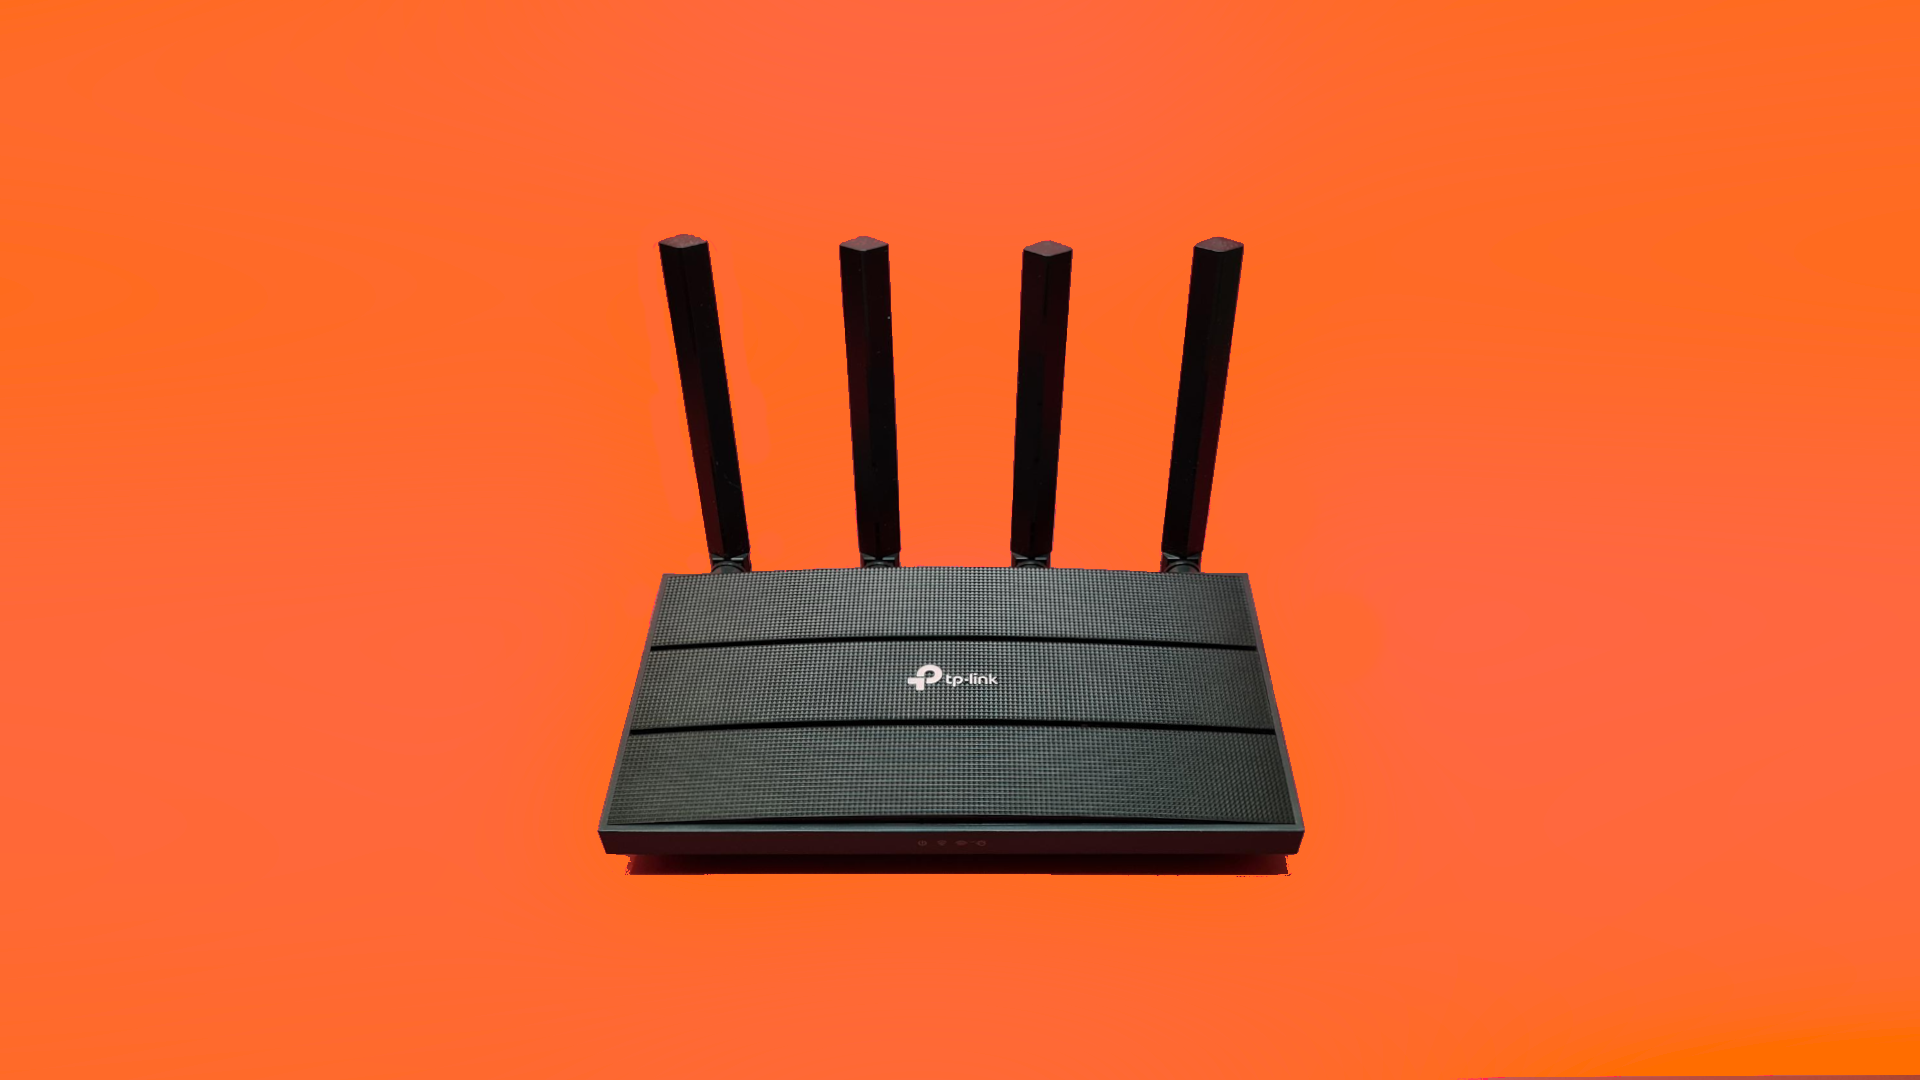 REVIEW: TP-Link Archer AX12 Router is the gateway to Wi-Fi 6